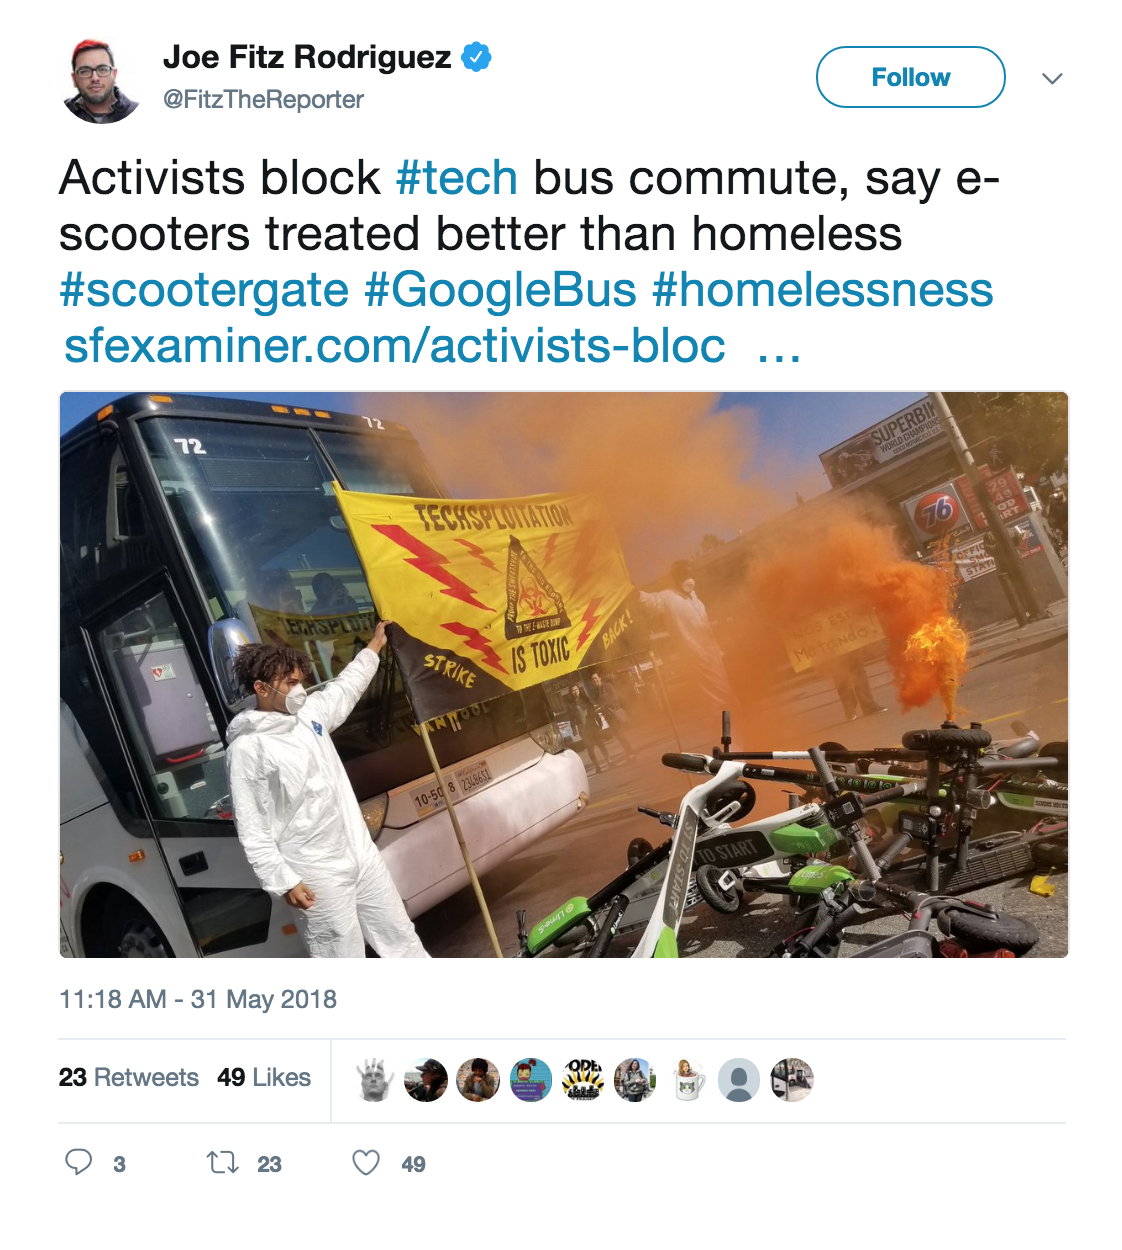 Tweet showing housing activists burning pile of scooters in front of buses carrying tech people